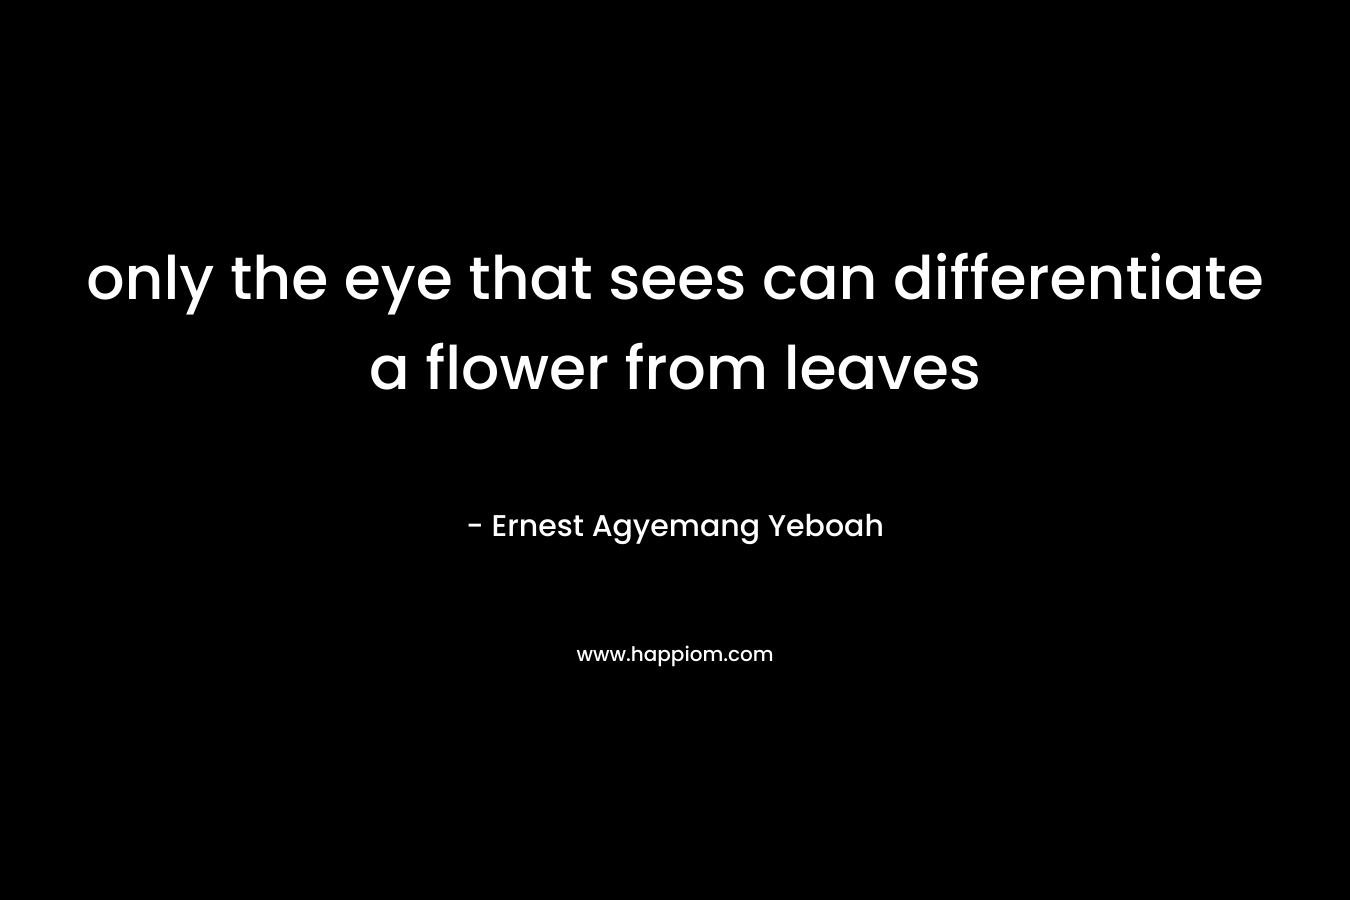 only the eye that sees can differentiate a flower from leaves